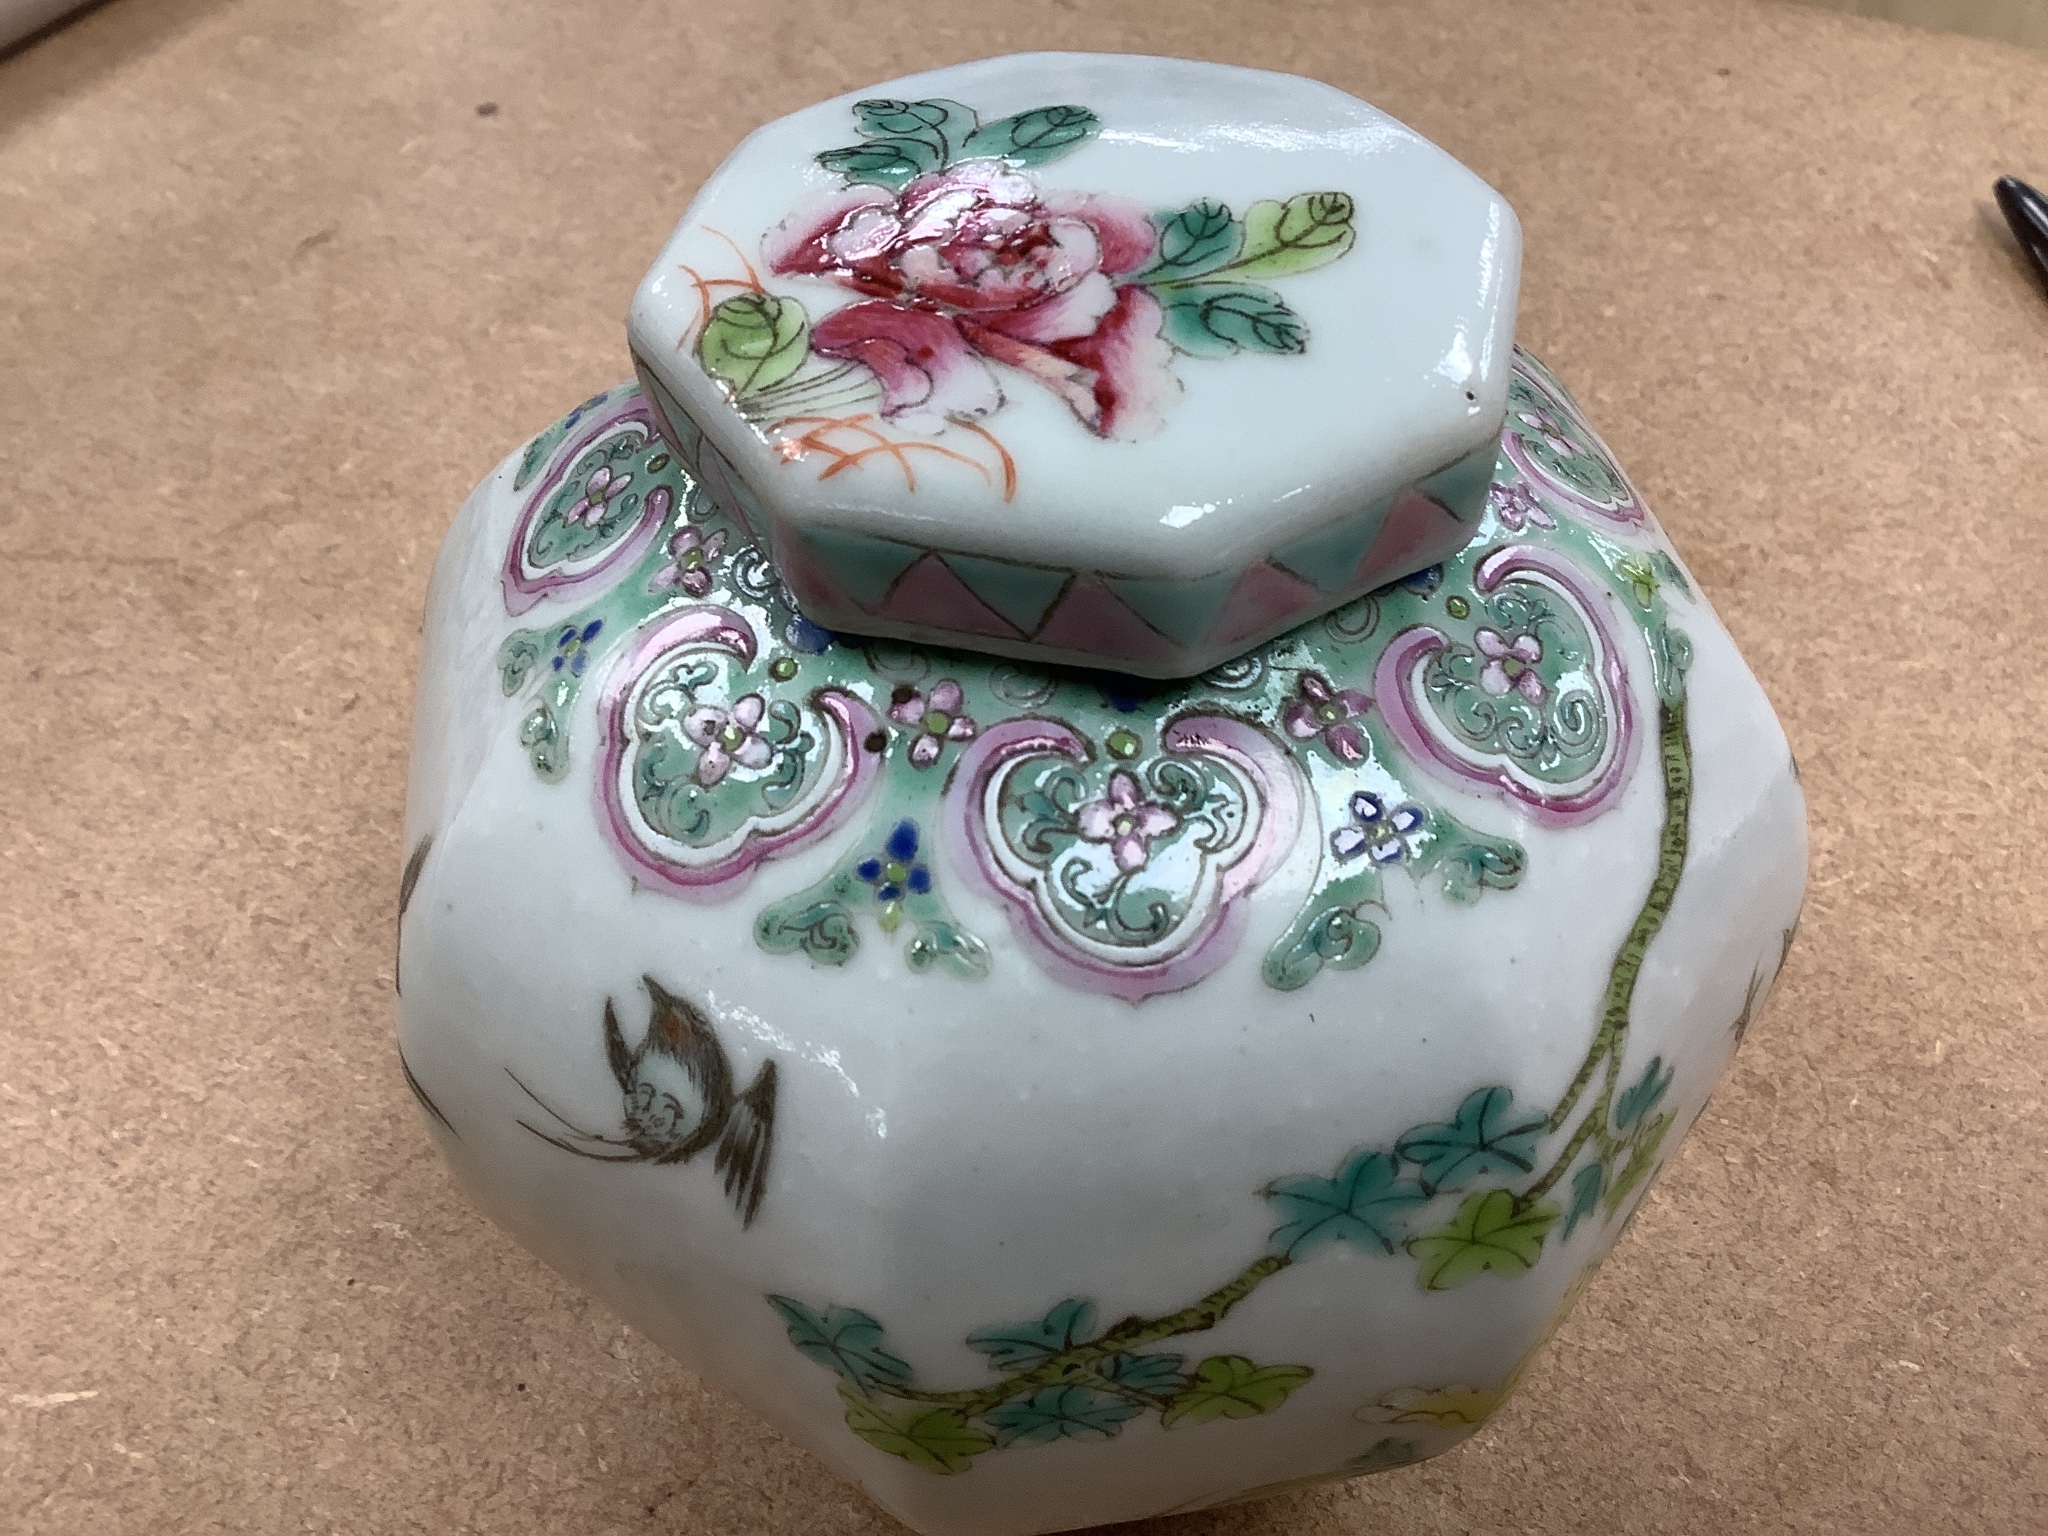 A Chinese Qianlong famille rose patty pan, and a 19th century Chinese ginger jar and cover (2)